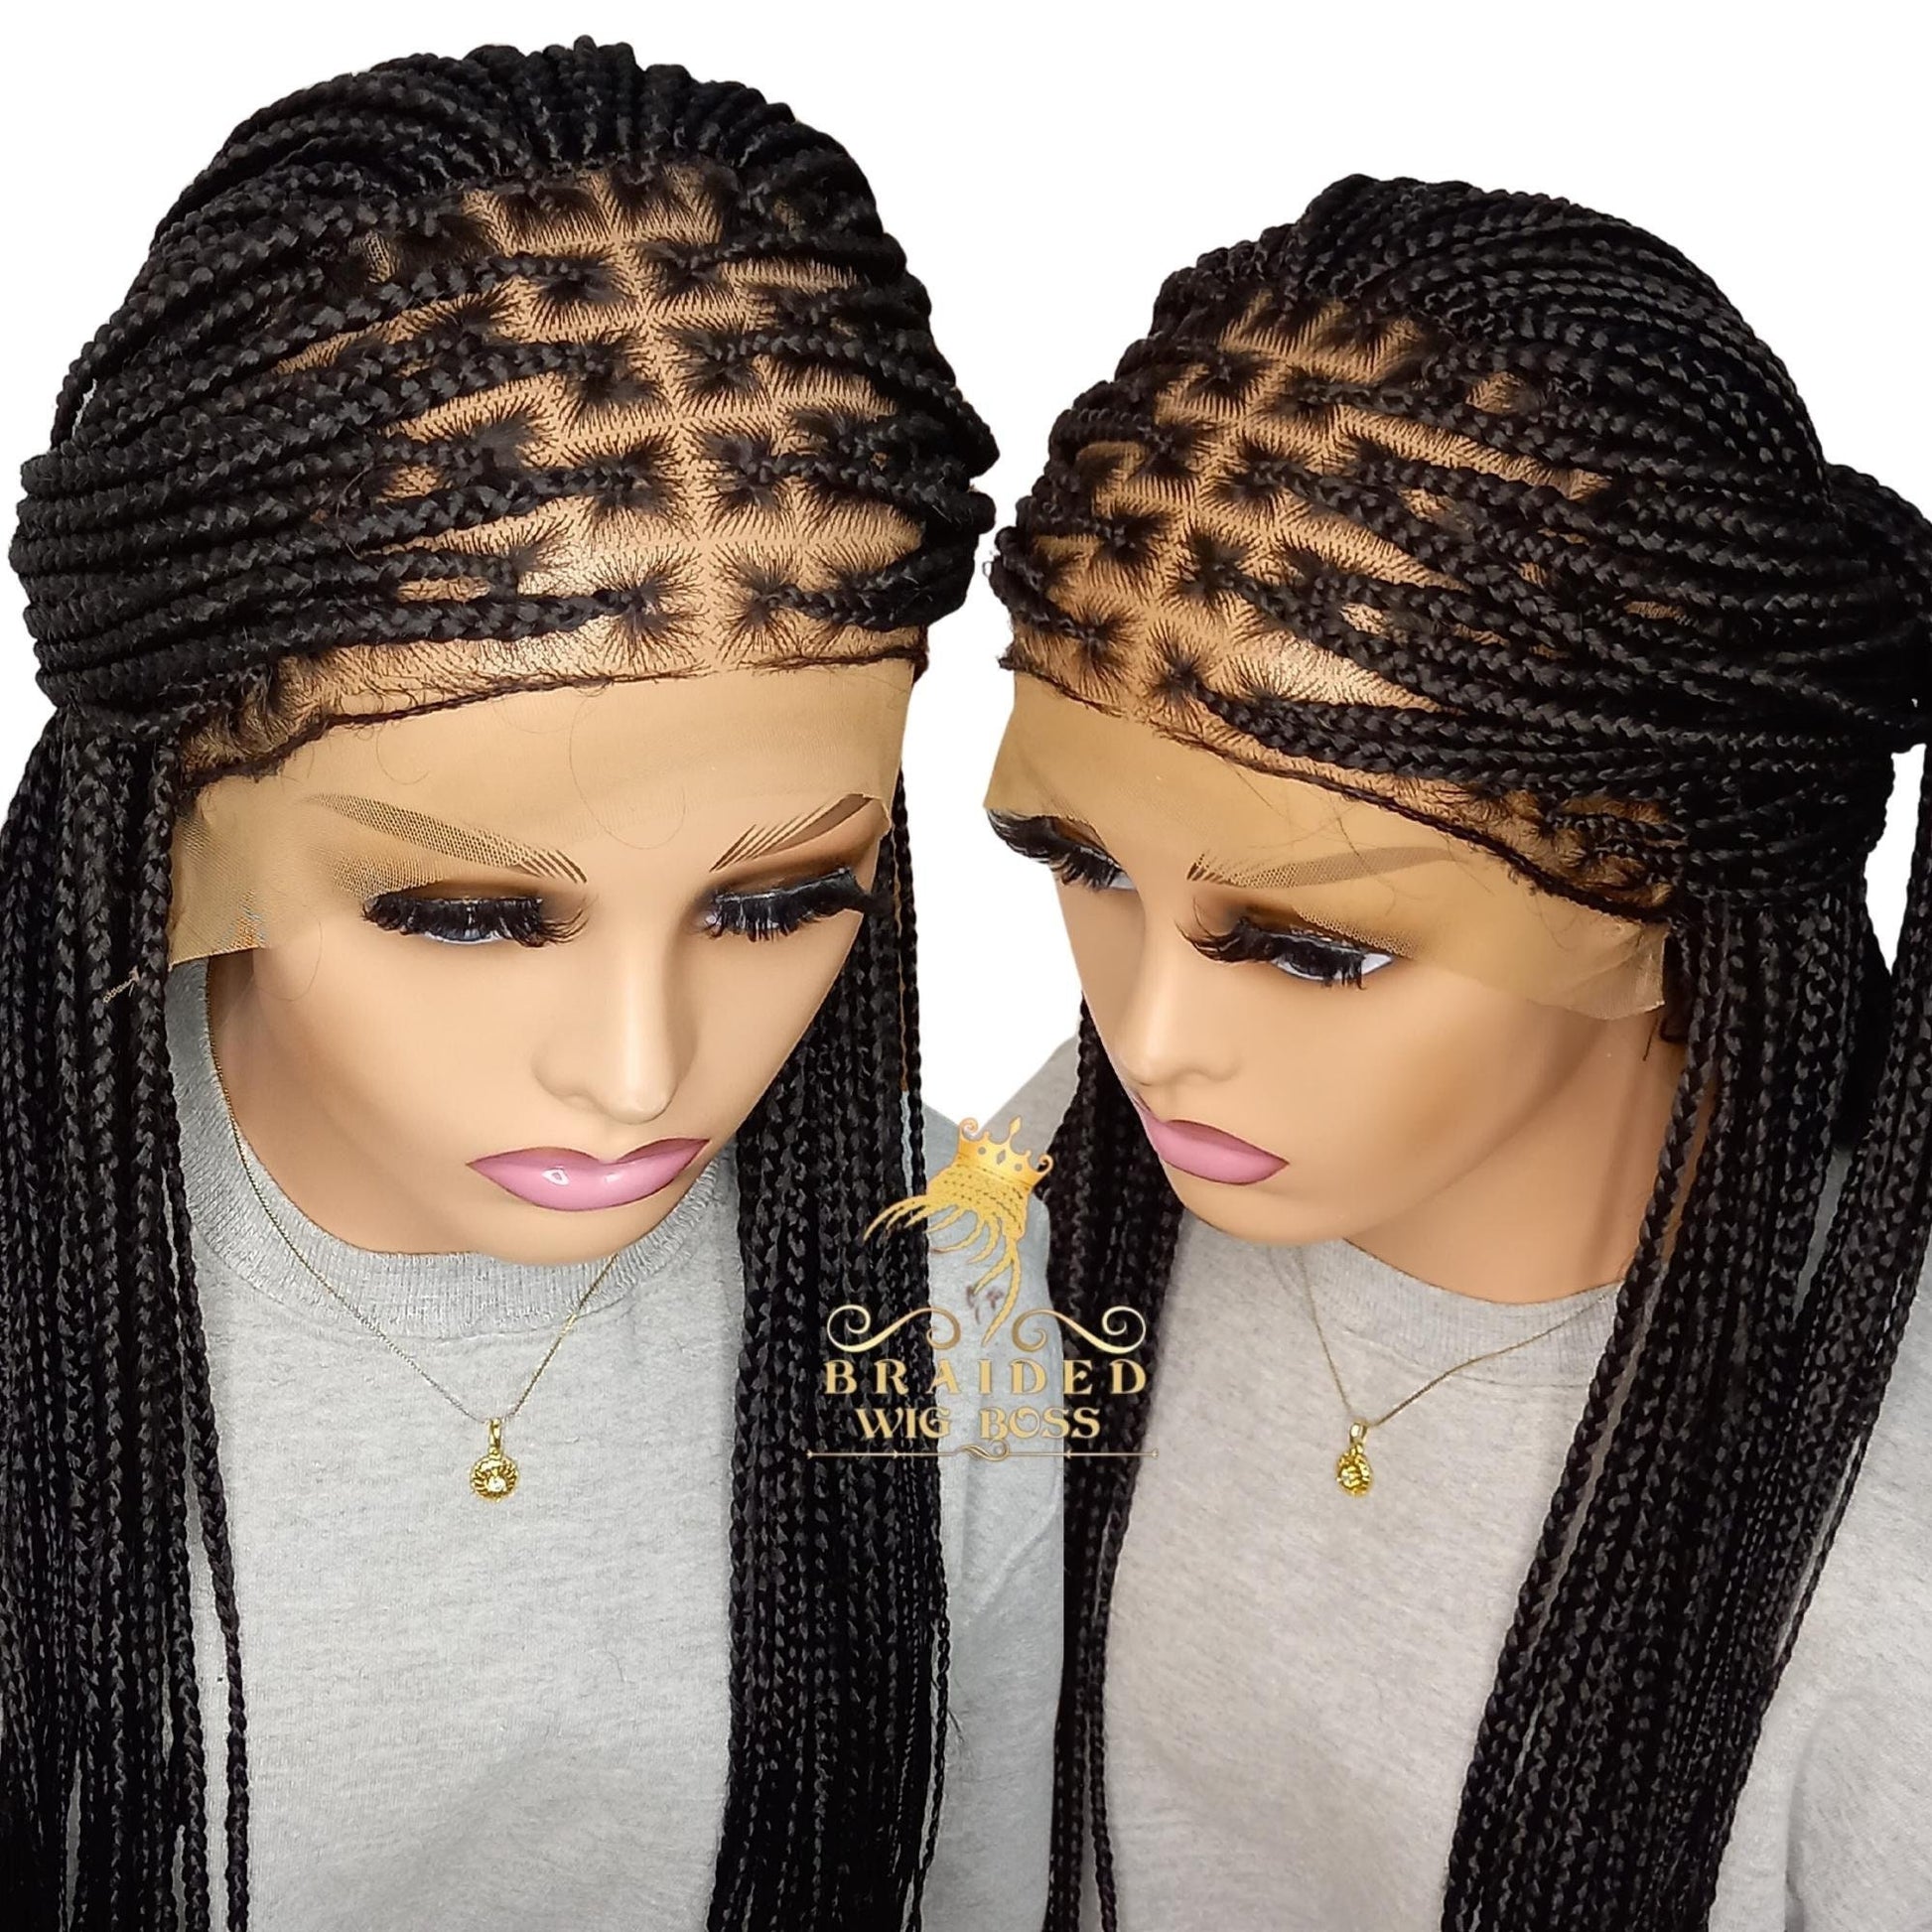 13x4 Knotless Braid Wig for Black Women - Box Braids Synthetic Braided Lace  Front Wig in Color 2